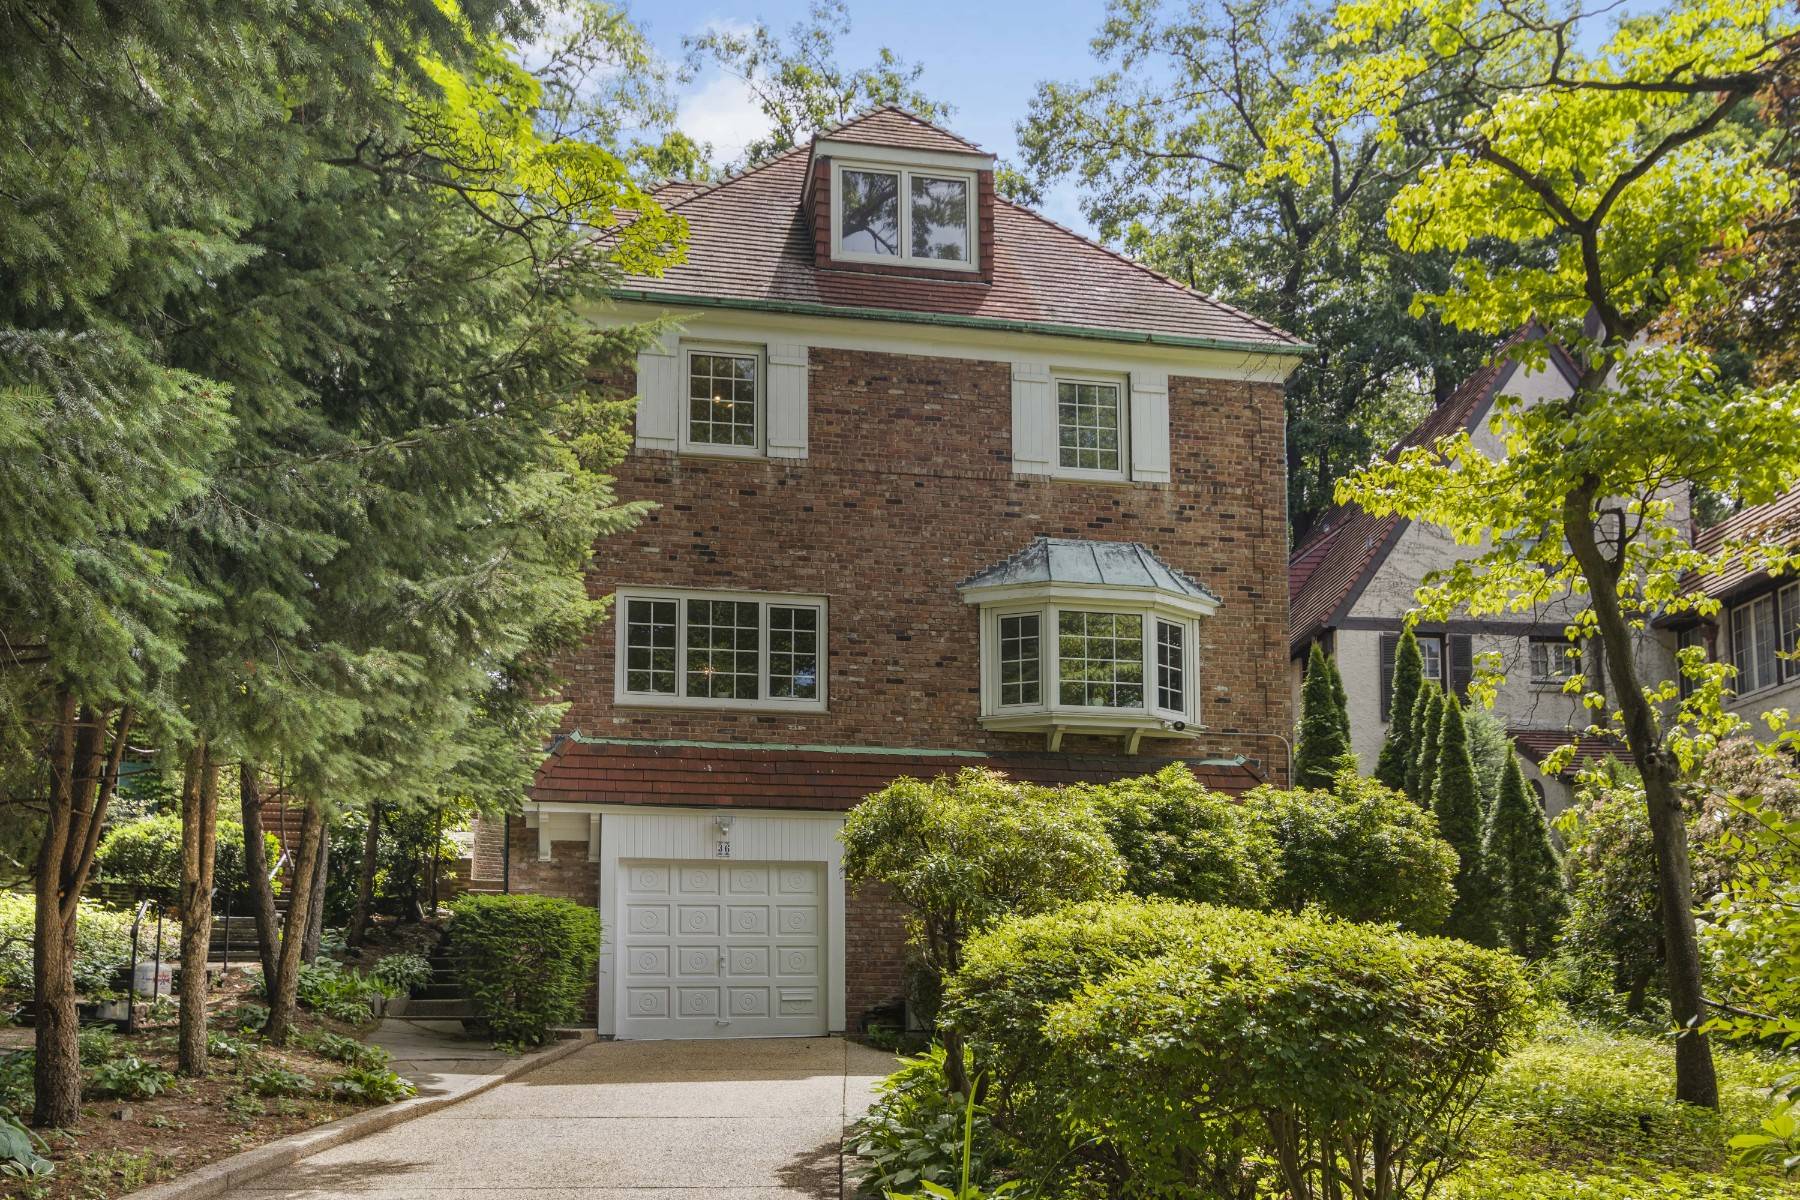 Exquisite four story brick house located on a quiet tree lined block in the heart of Forest Hills Gardens.